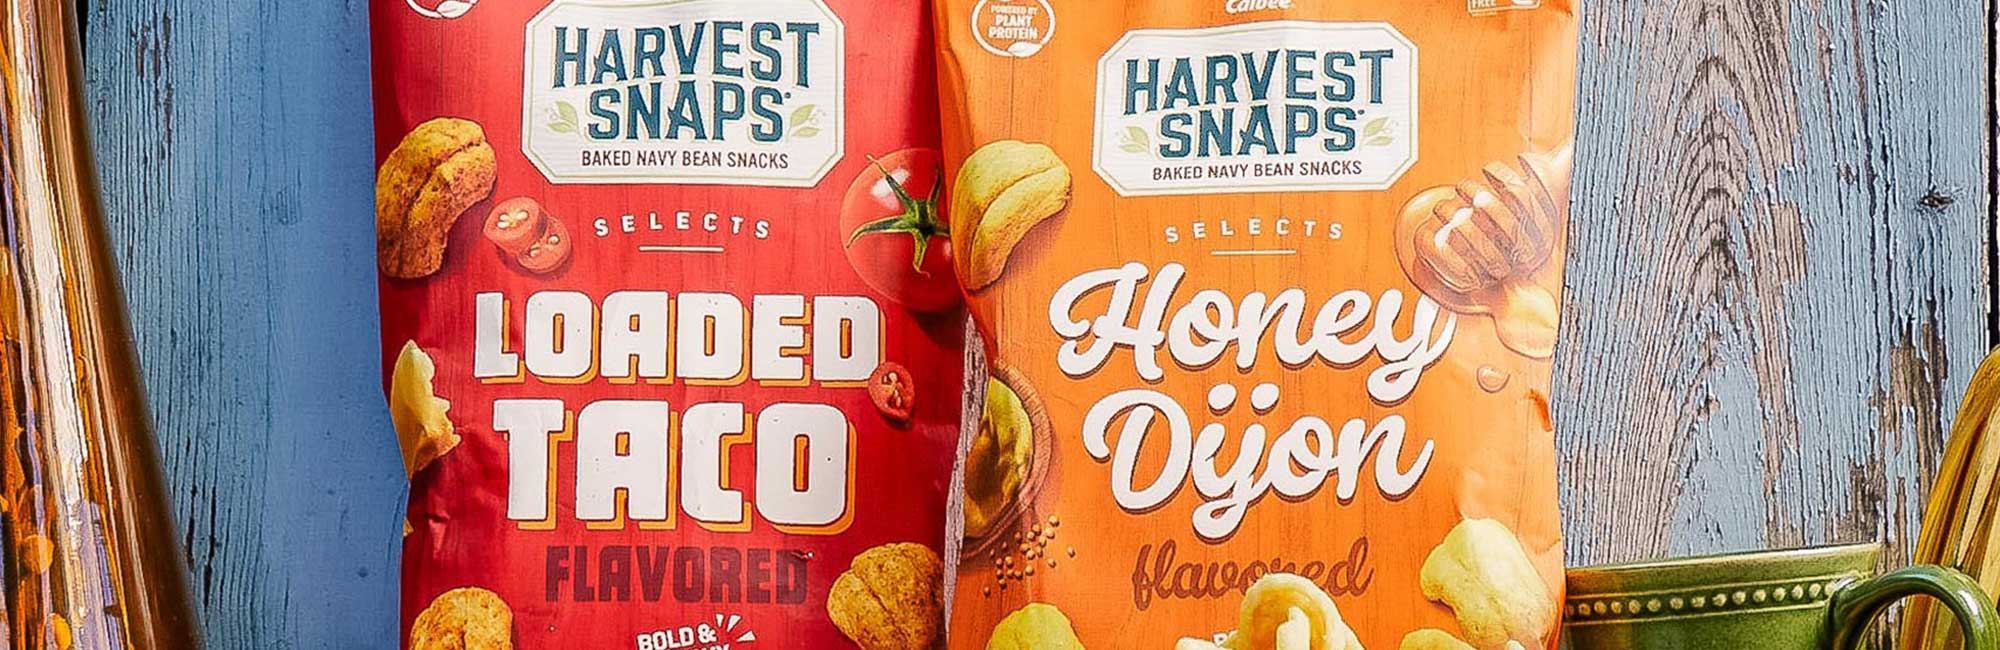 Harvest Snaps for healthy snacking